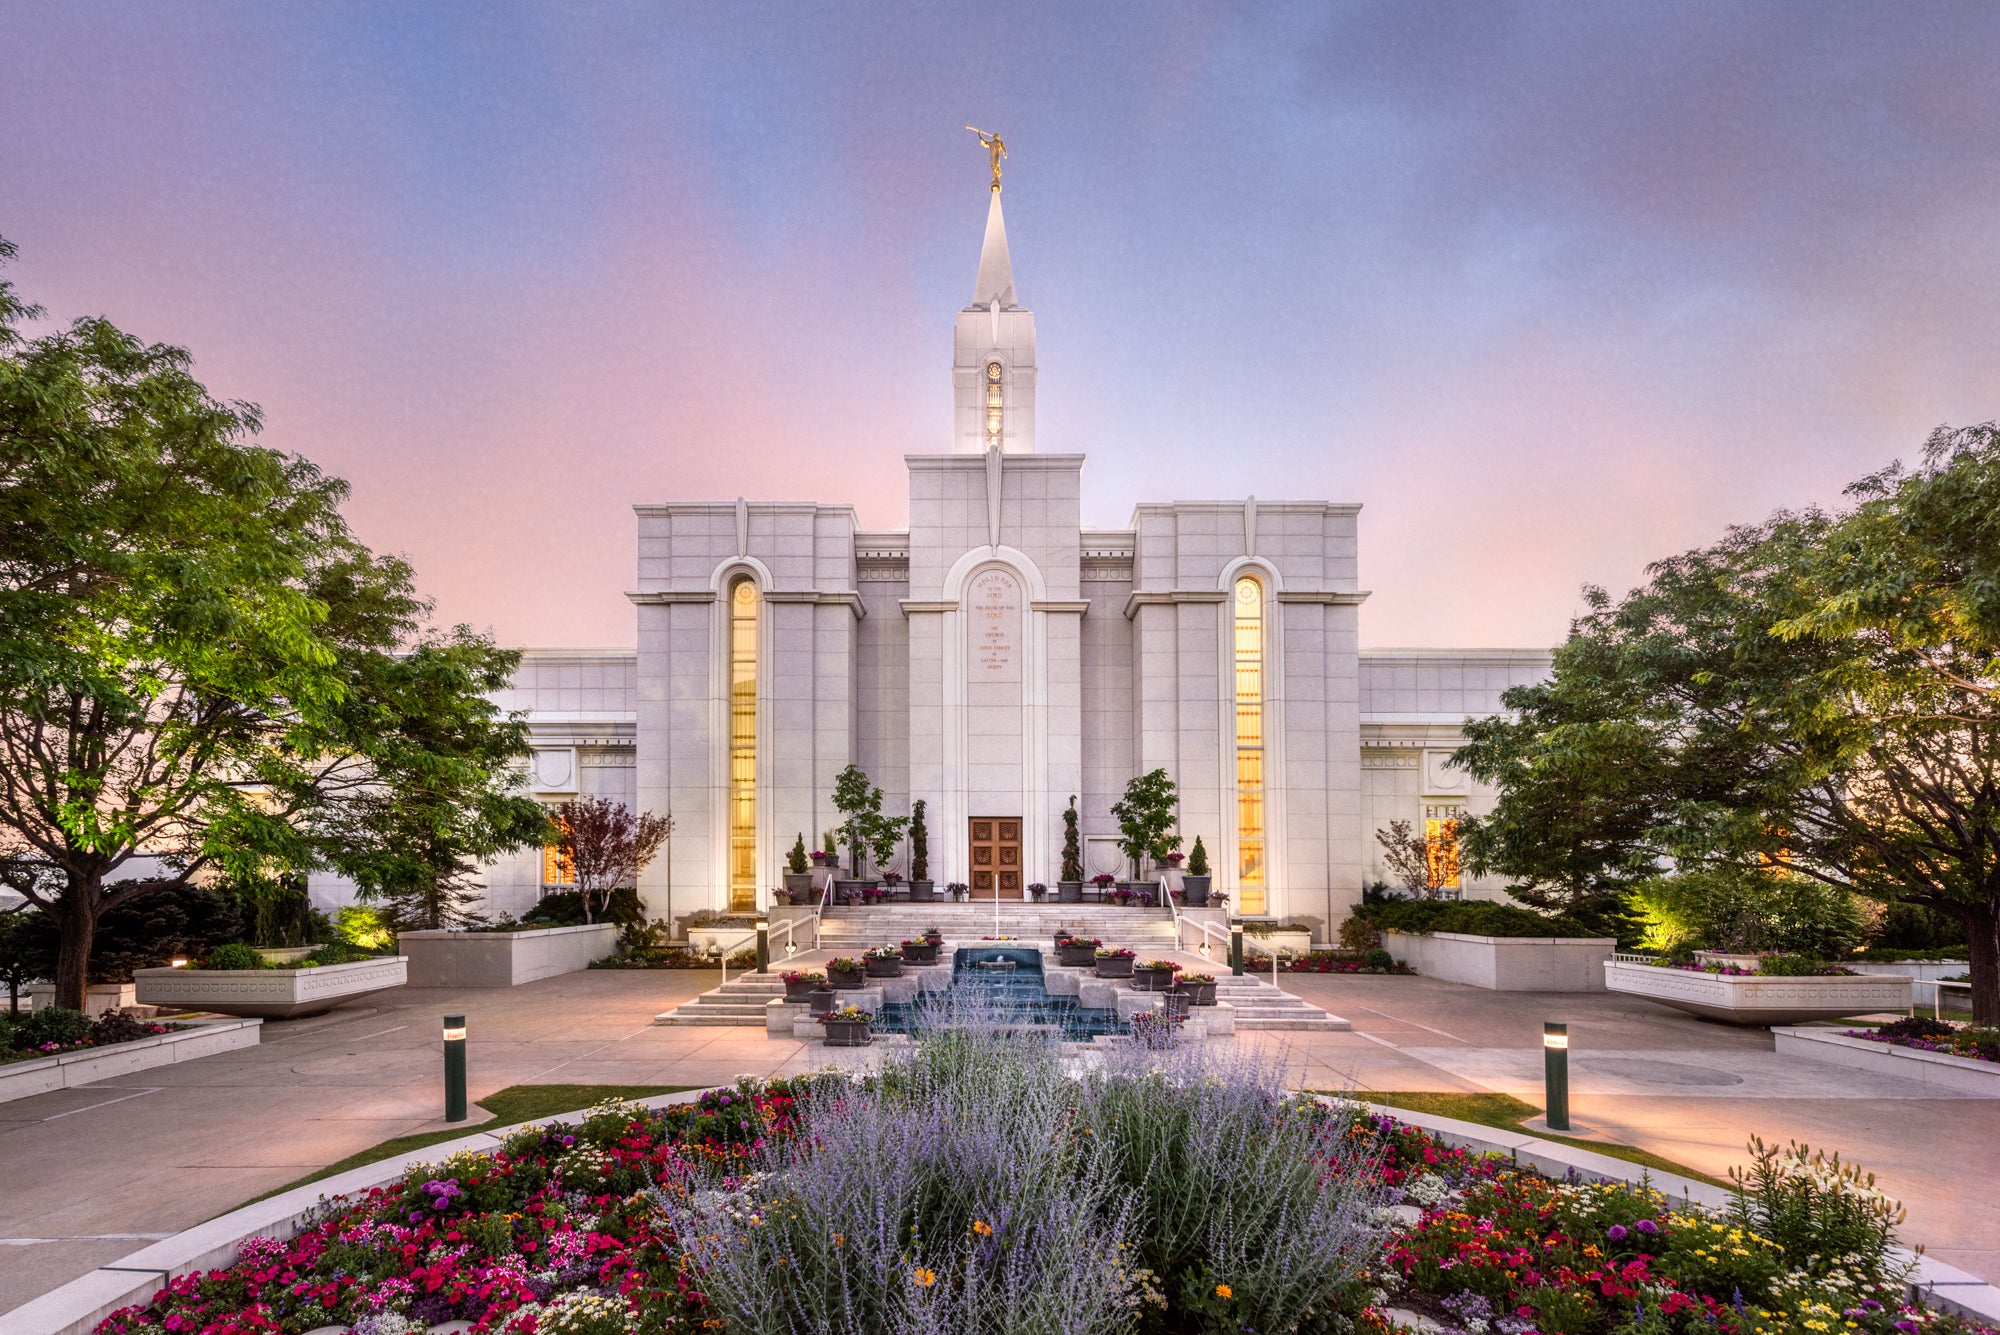 Bountiful Temple - A House of Peace by Robert A Boyd